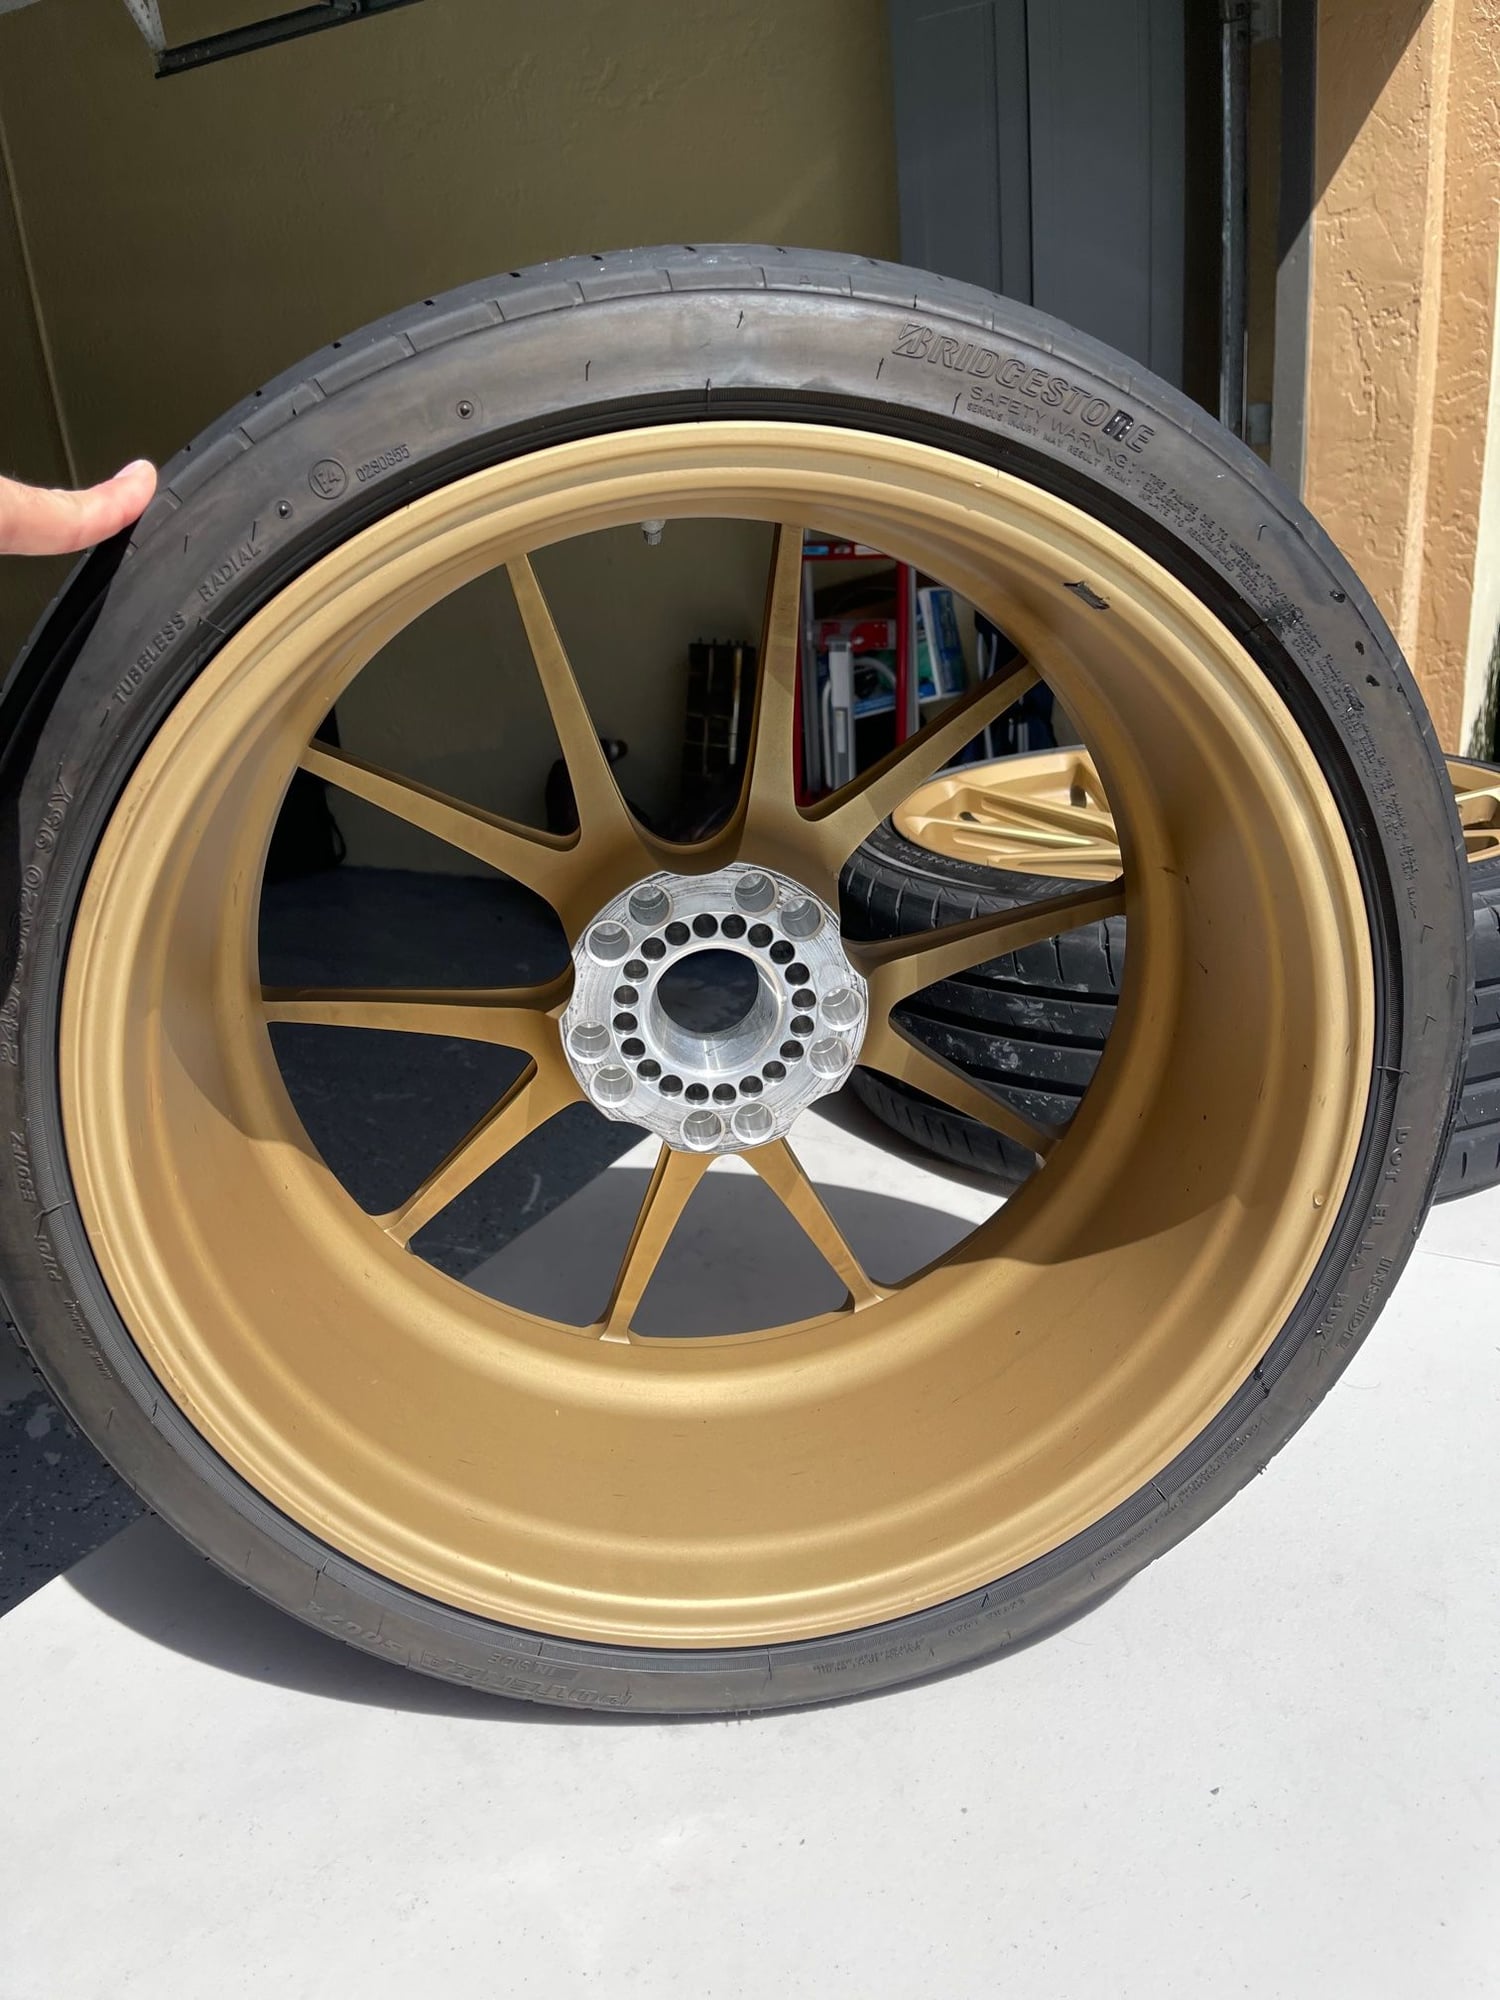 Wheels and Tires/Axles - GT3 20" Forgeline GS1R CL wheels fits Cup hubs only - for sale or trade - Used - 0  All Models - Boca Raton, FL 33428, United States